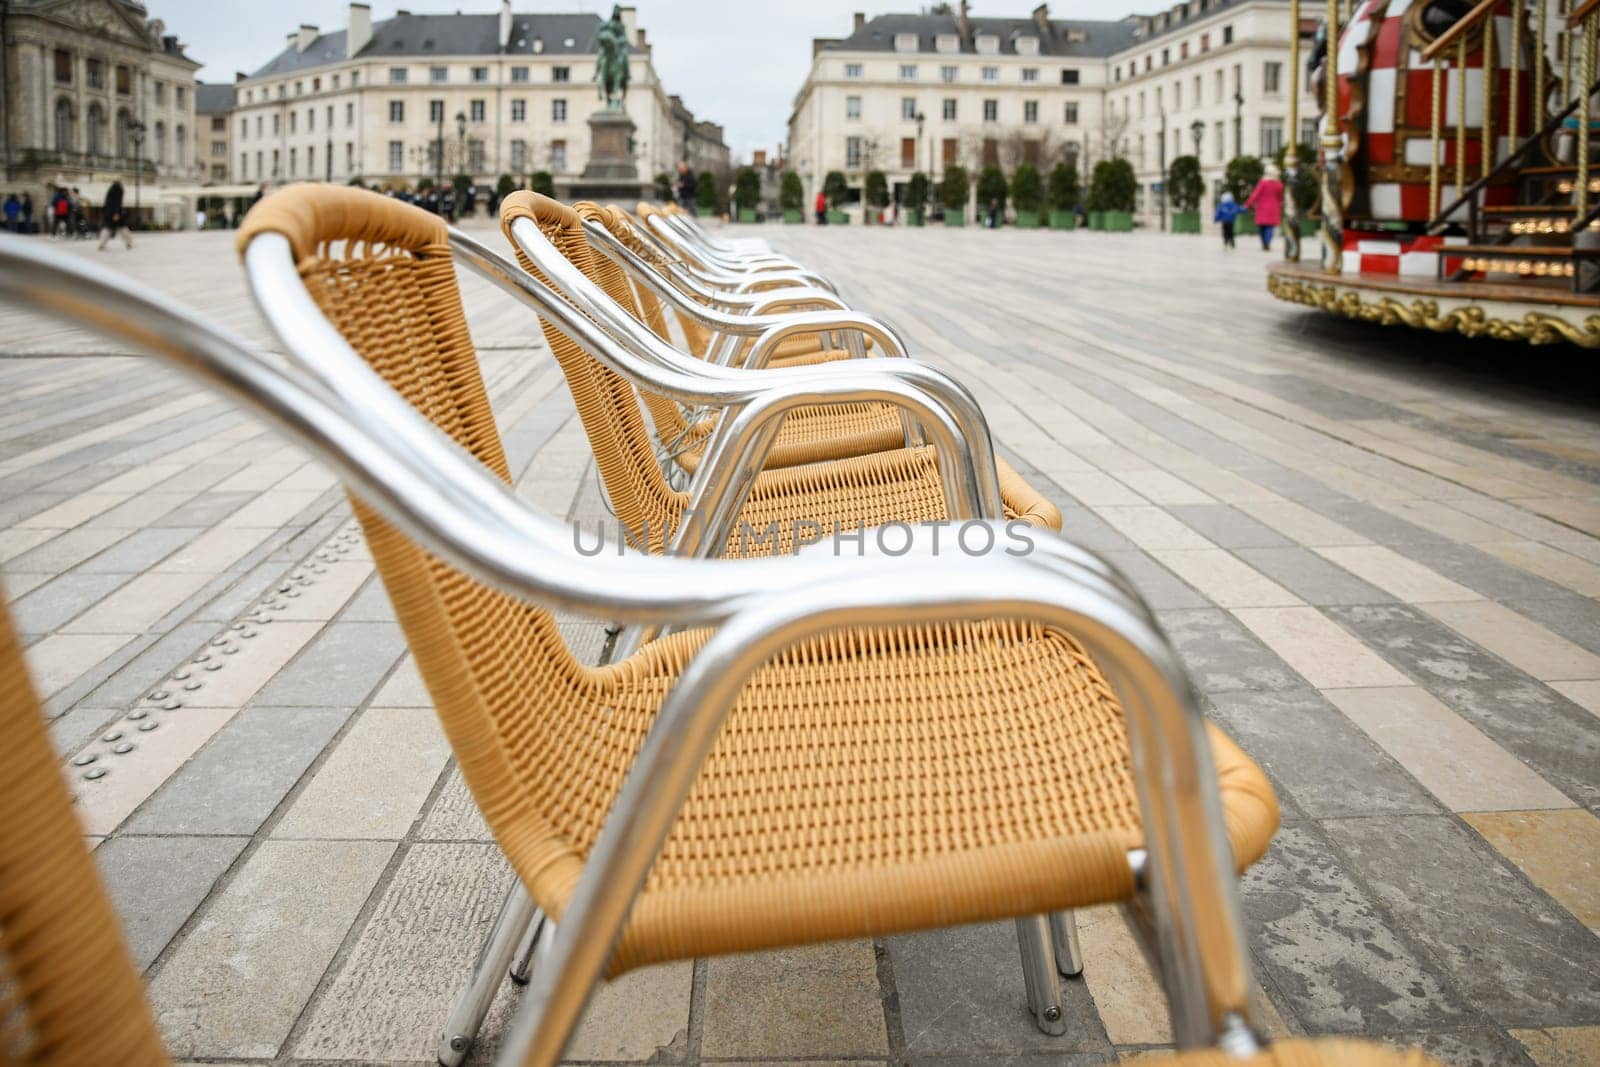 Wicker chairs in the main square of Orleans in France